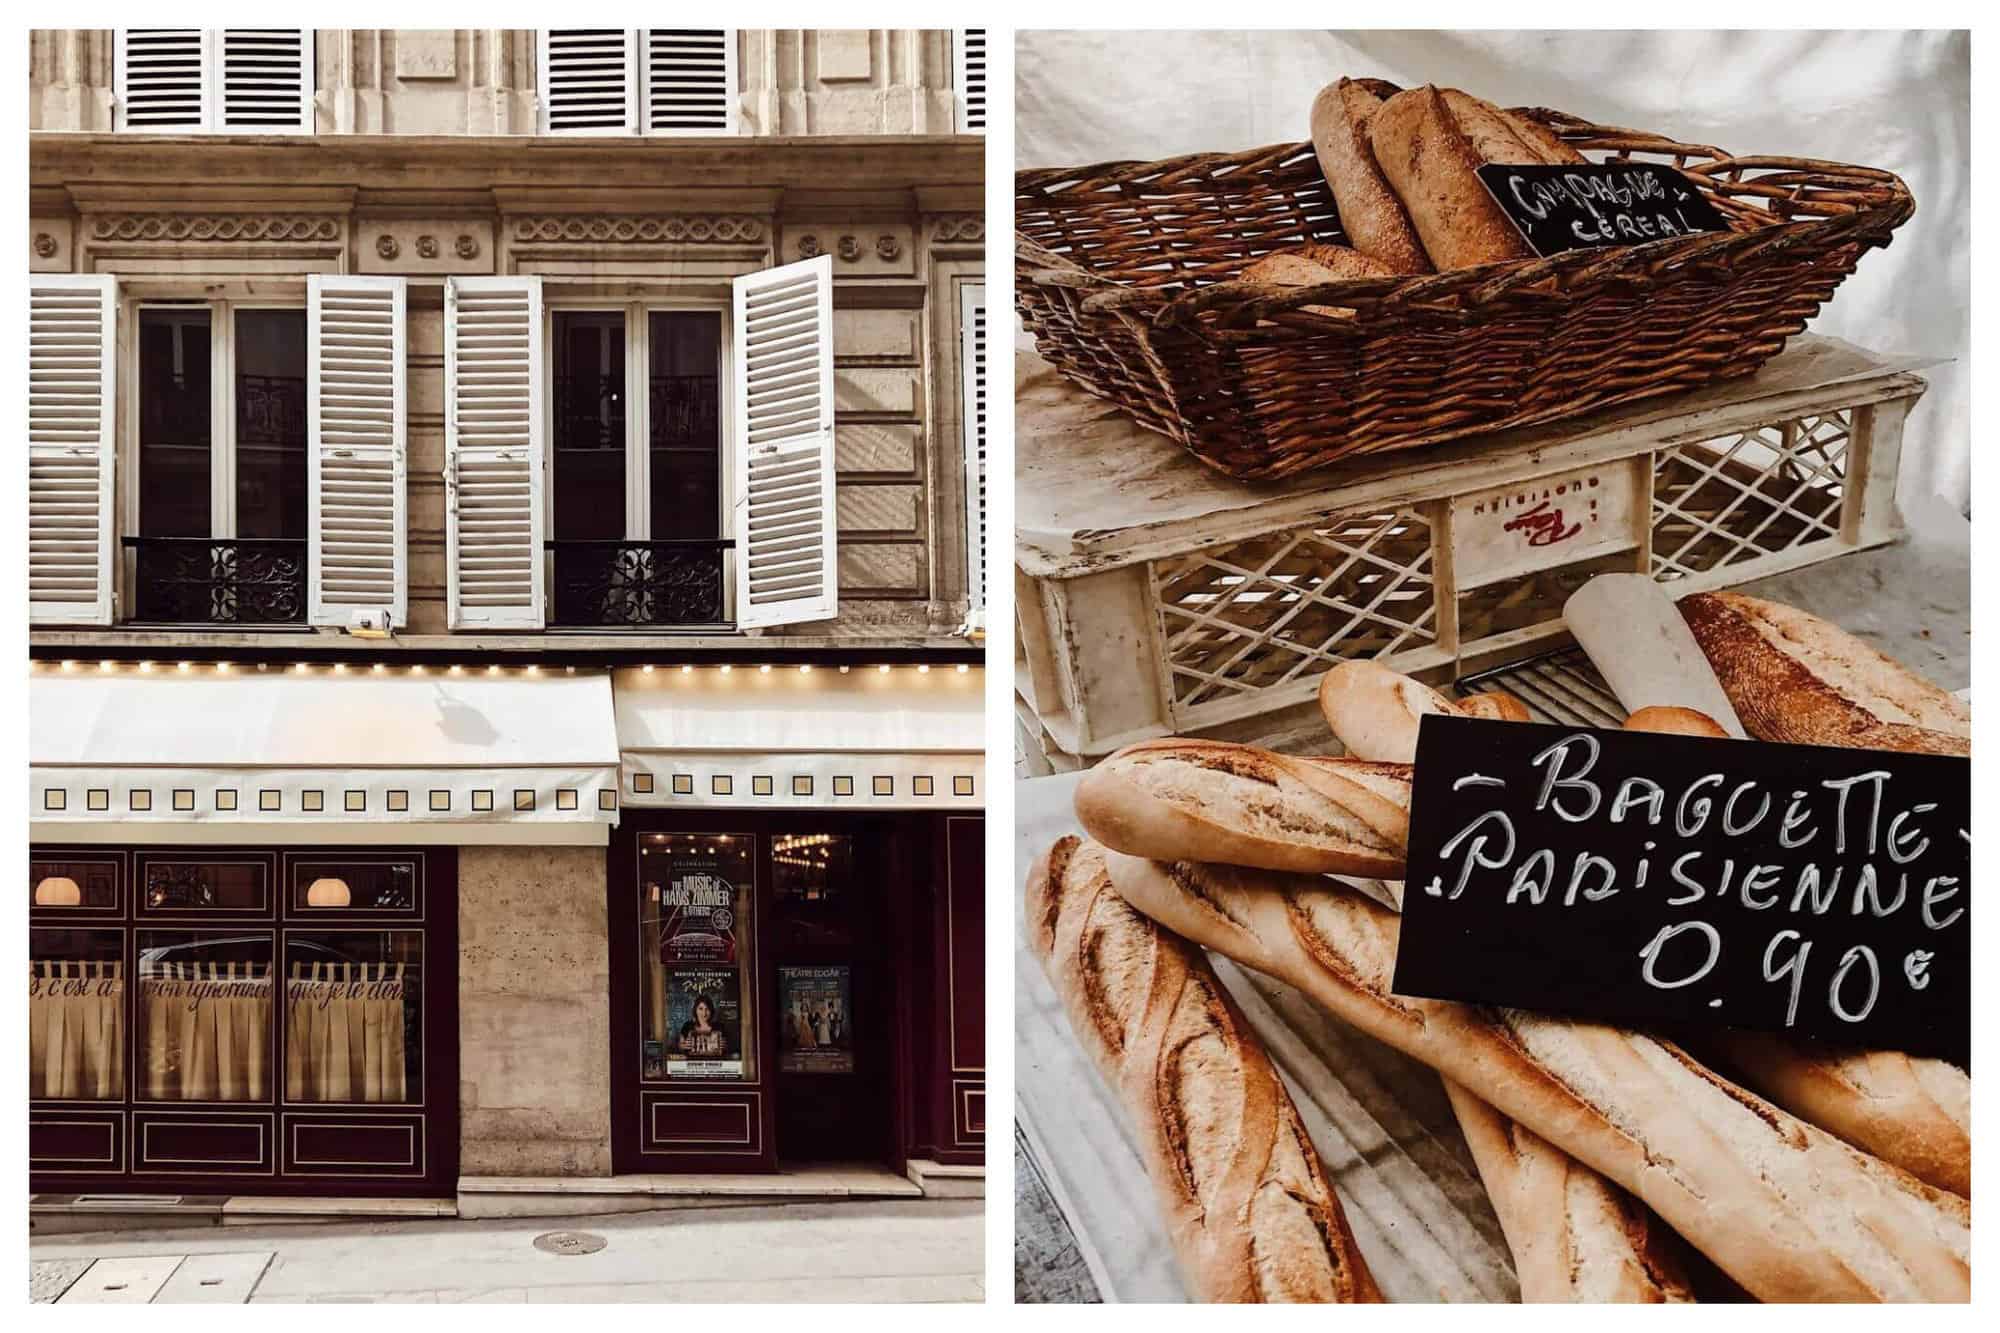 Left: the outside of a shop in Paris. There is wood covering the outside of the shop and there is a white awning. There are two open windows with white shutters above the shop. Right: a pile of several baguettes. There is a small sign on top of them that reads "baguette Parisienne 0.90 €." There is a small basket filled with more bread in the background.